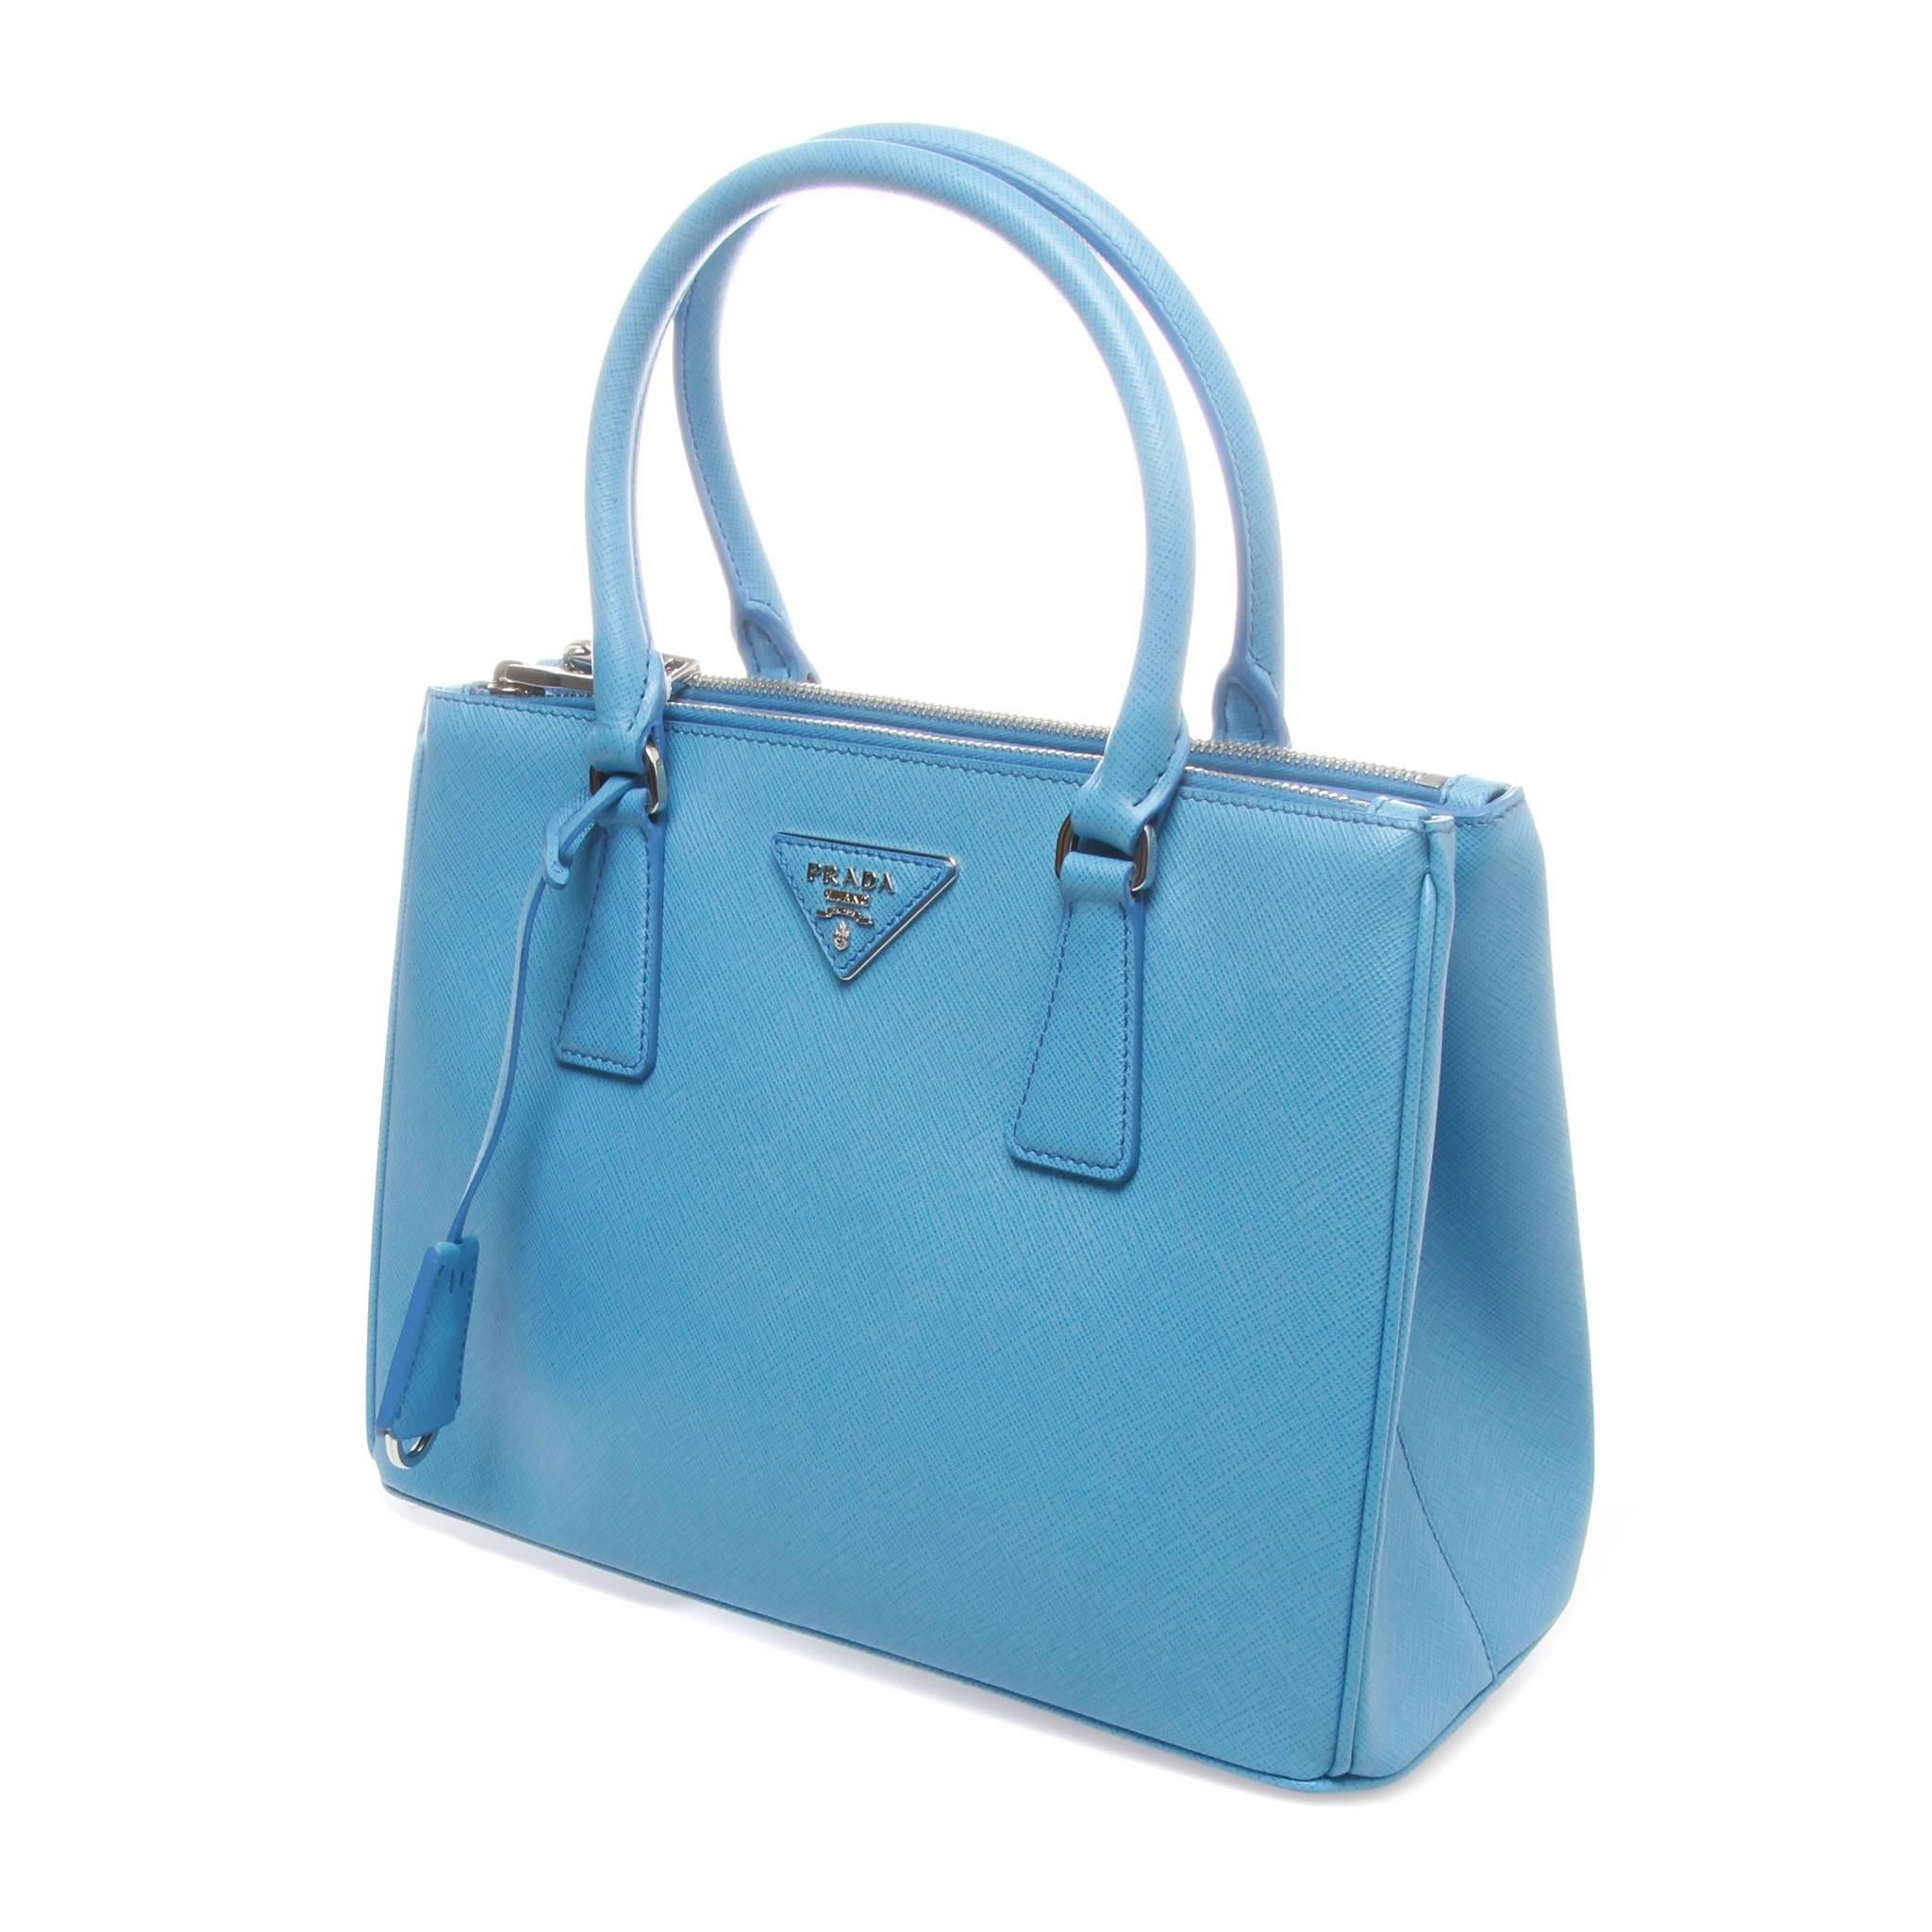 28cm Prada Galleria shopping bag in sea blue saffiano lux leather. Featuring silver-tone hardware, dual rolled top handles, single adjustable shoulder strap, logo placard at front face, dual snap expansions at sides, protective feet at base, tonal